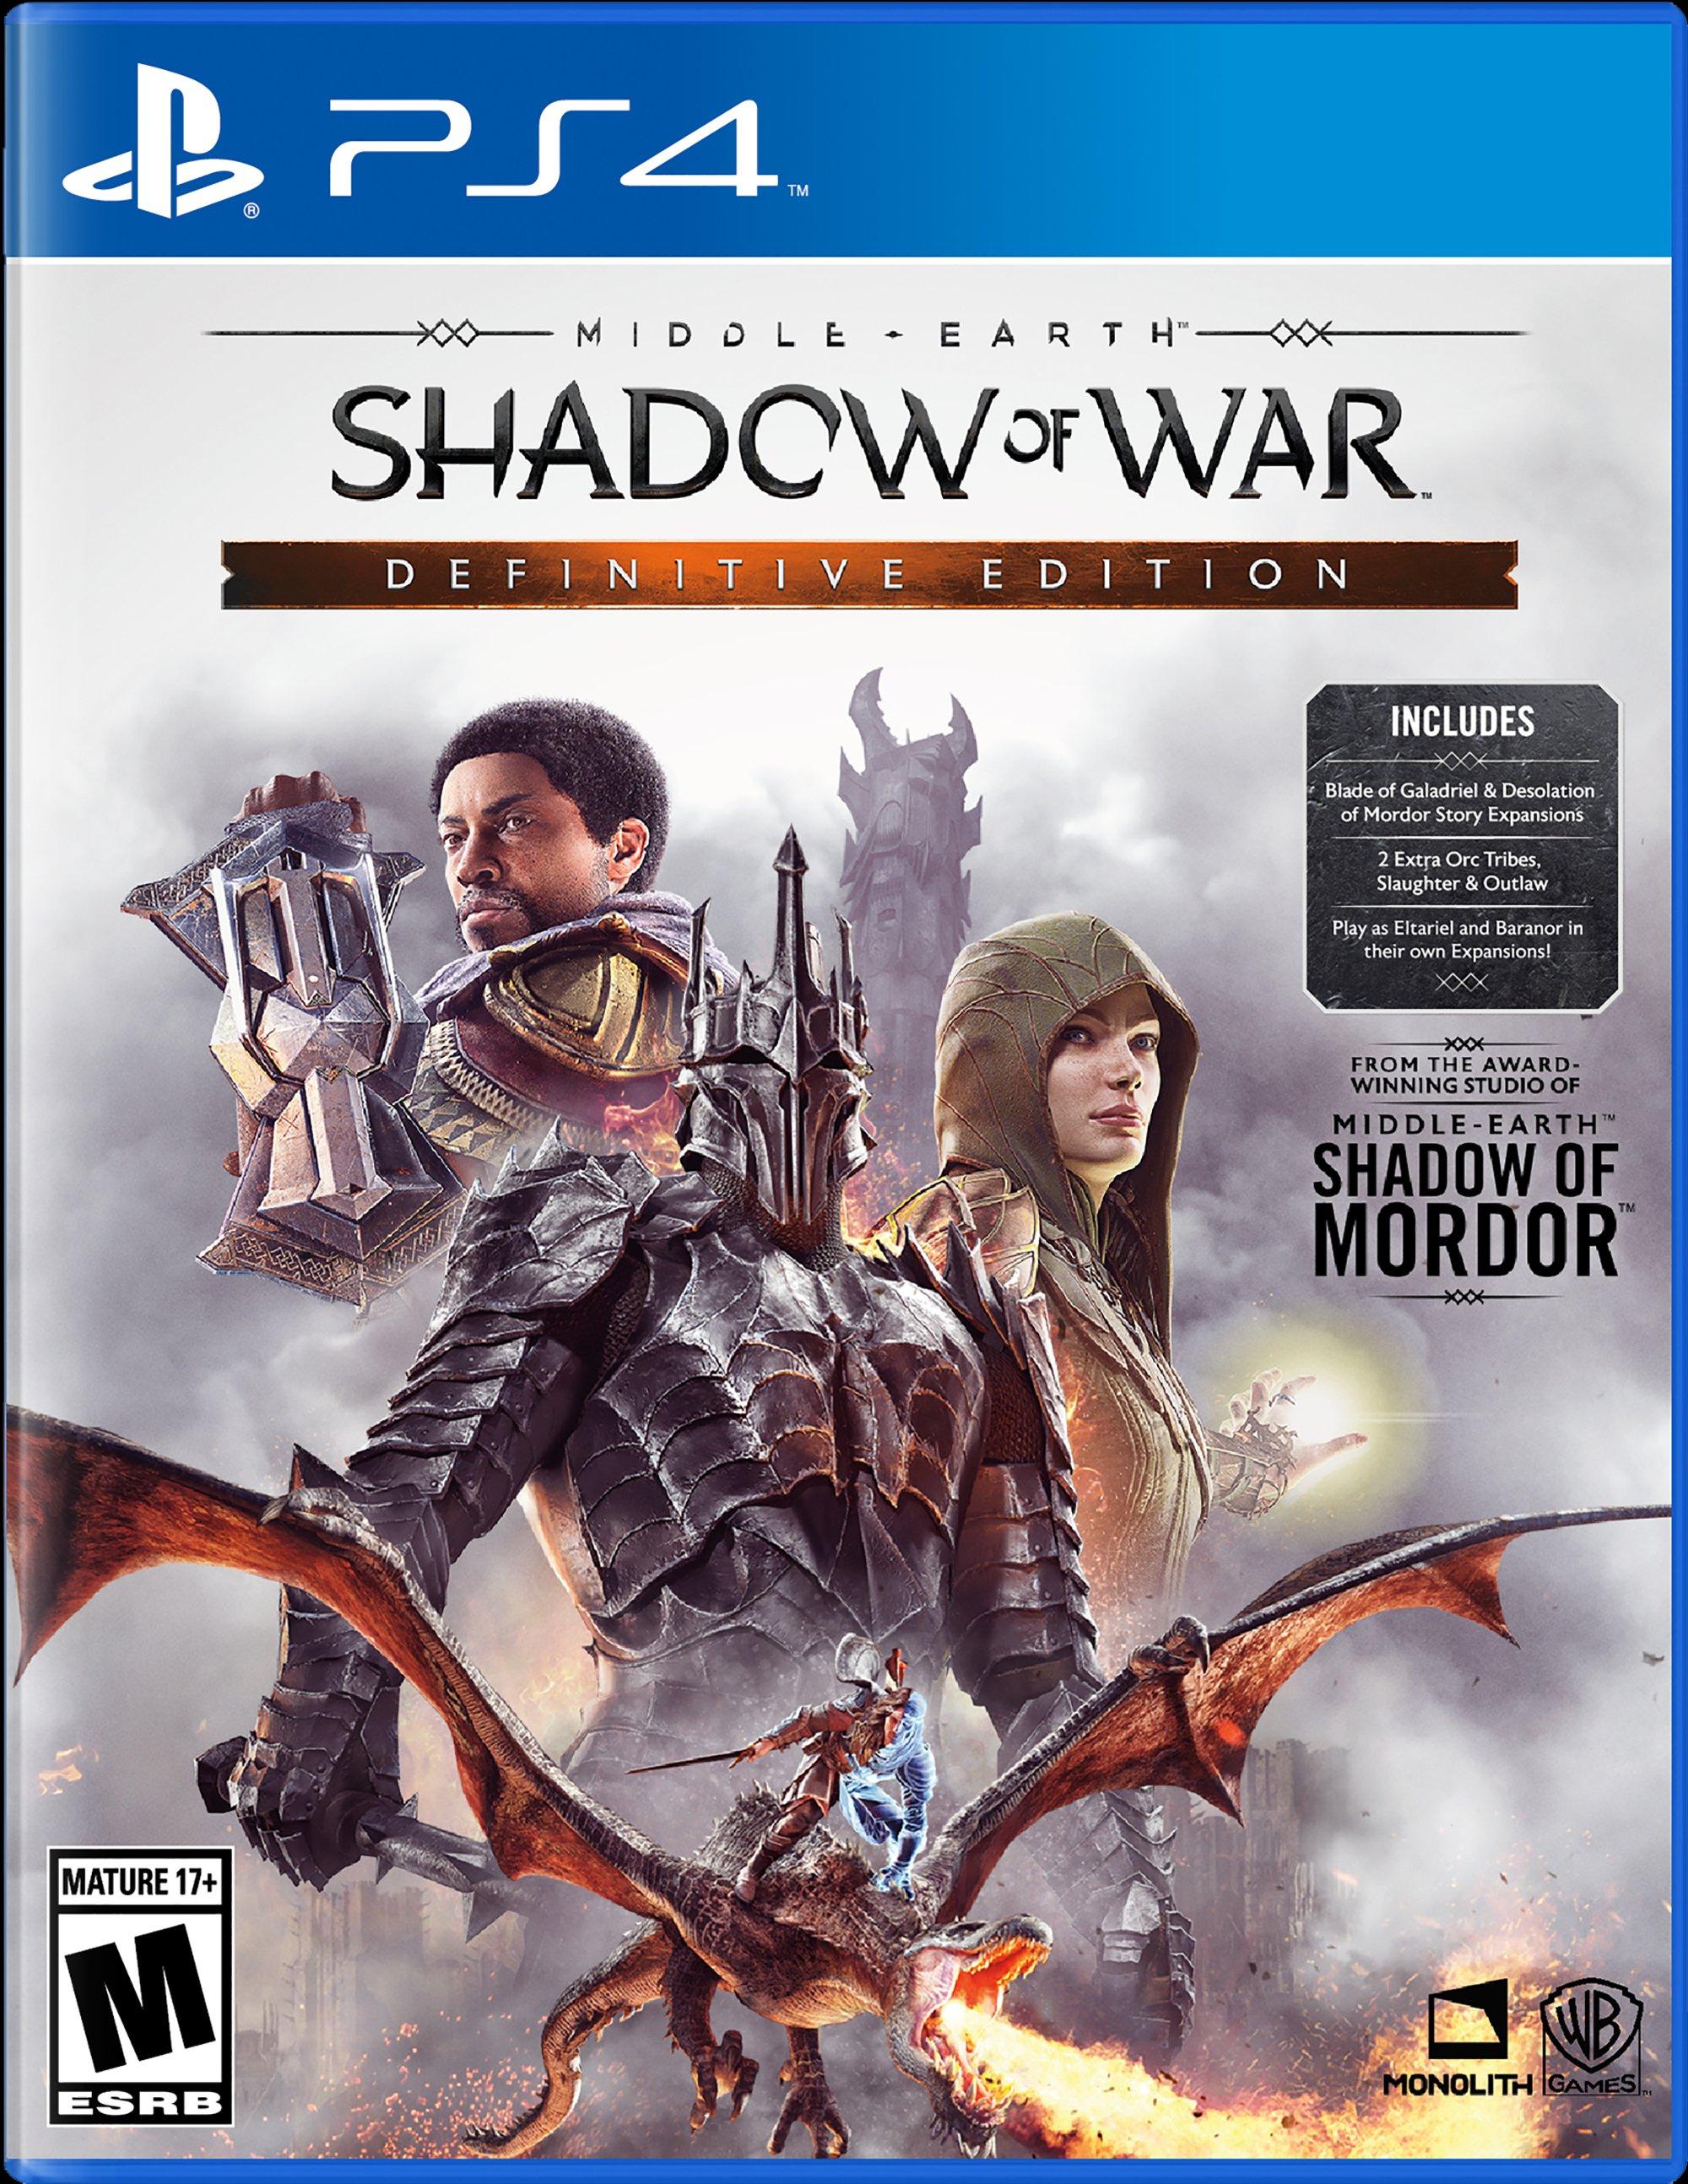 shadow of war price ps4